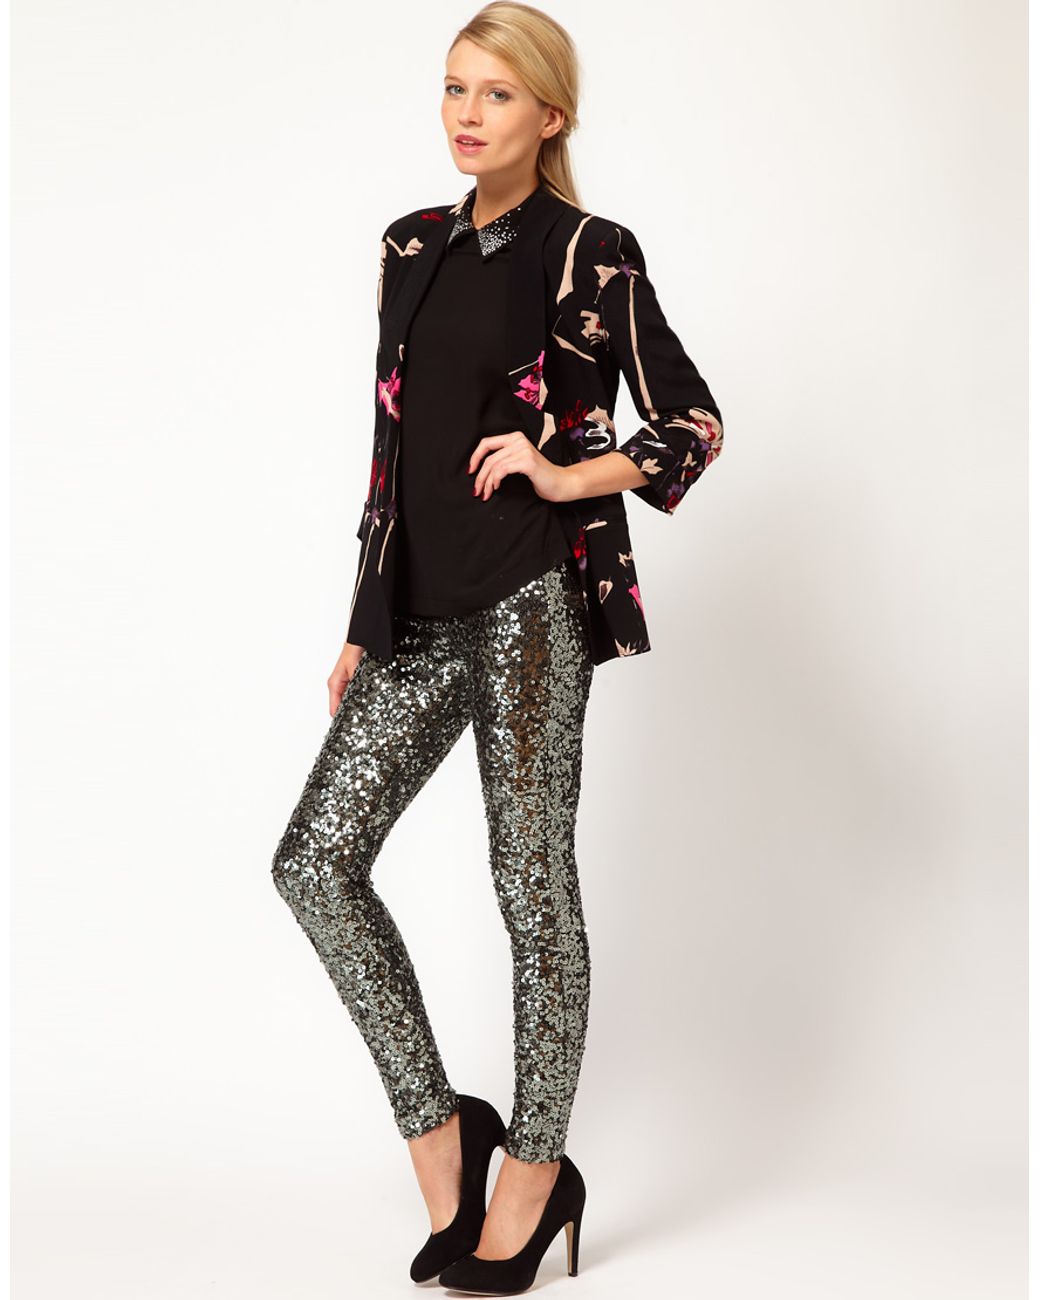 French Connection Sequin Legging in Metallic